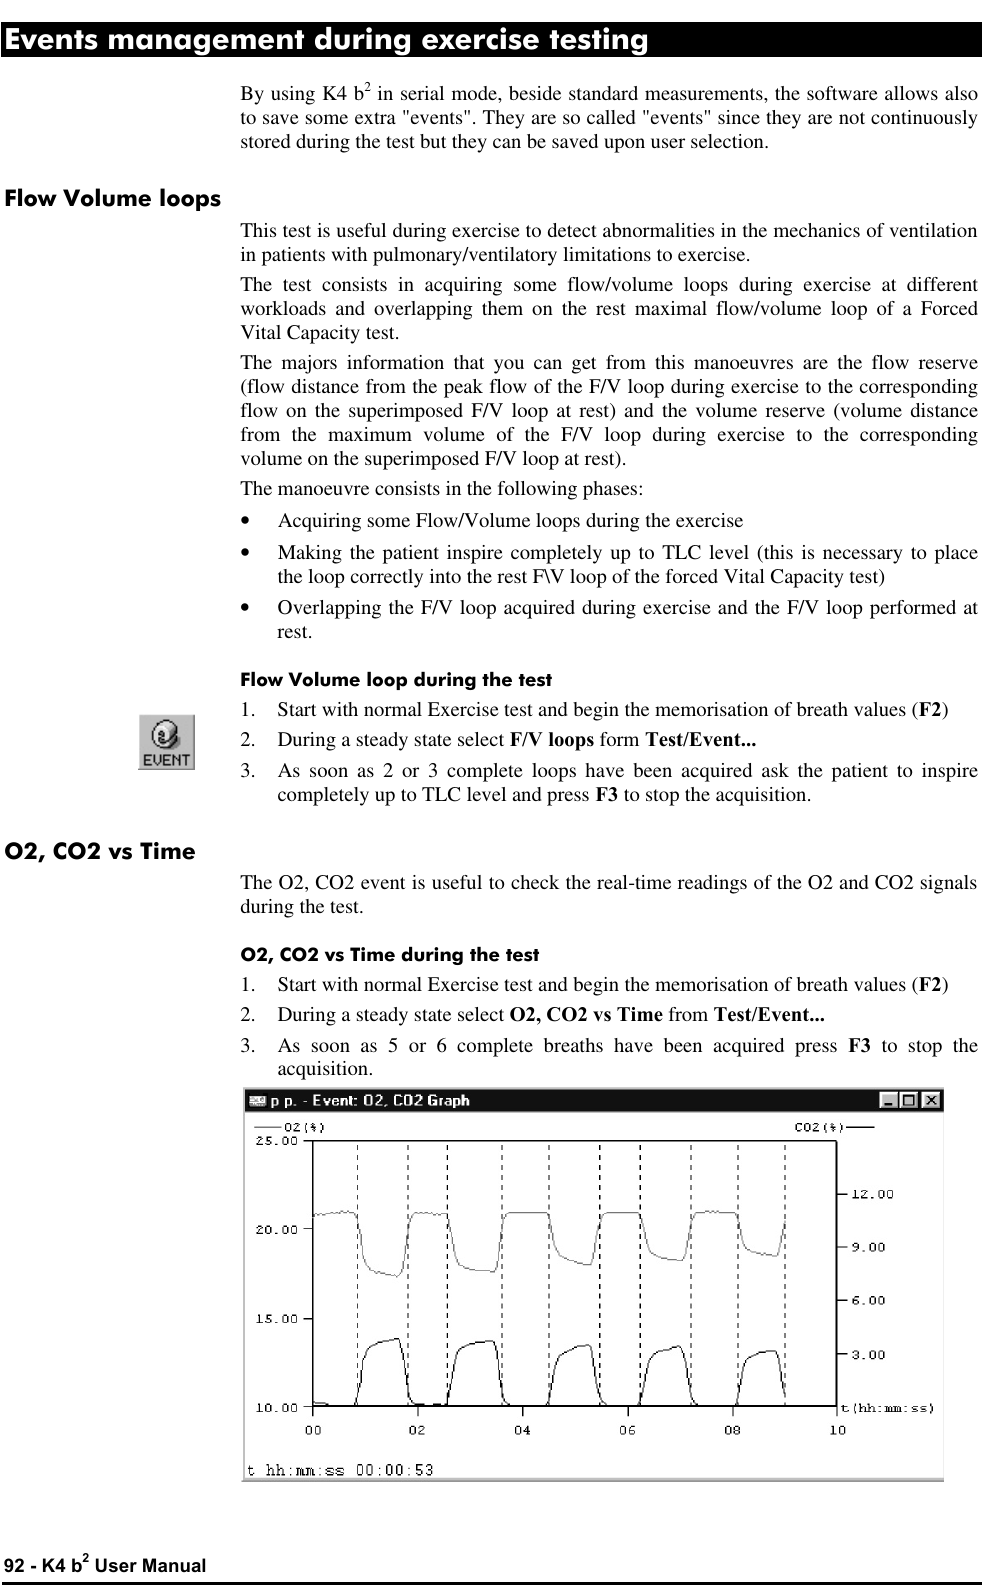  92 - K4 b2 User Manual Events management during exercise testing By using K4 b2 in serial mode, beside standard measurements, the software allows also to save some extra &quot;events&quot;. They are so called &quot;events&quot; since they are not continuously stored during the test but they can be saved upon user selection. Flow Volume loops This test is useful during exercise to detect abnormalities in the mechanics of ventilation in patients with pulmonary/ventilatory limitations to exercise. The test consists in acquiring some flow/volume loops during exercise at different workloads and overlapping them on the rest maximal flow/volume loop of a Forced Vital Capacity test. The majors information that you can get from this manoeuvres are the flow reserve (flow distance from the peak flow of the F/V loop during exercise to the corresponding flow on the superimposed F/V loop at rest) and the volume reserve (volume distance from the maximum volume of the F/V loop during exercise to the corresponding volume on the superimposed F/V loop at rest). The manoeuvre consists in the following phases: • Acquiring some Flow/Volume loops during the exercise • Making the patient inspire completely up to TLC level (this is necessary to place the loop correctly into the rest F\V loop of the forced Vital Capacity test) • Overlapping the F/V loop acquired during exercise and the F/V loop performed at rest. Flow Volume loop during the test 1. Start with normal Exercise test and begin the memorisation of breath values (F2) 2. During a steady state select F/V loops form Test/Event... 3. As soon as 2 or 3 complete loops have been acquired ask the patient to inspire completely up to TLC level and press F3 to stop the acquisition. O2, CO2 vs Time The O2, CO2 event is useful to check the real-time readings of the O2 and CO2 signals during the test. O2, CO2 vs Time during the test 1. Start with normal Exercise test and begin the memorisation of breath values (F2) 2. During a steady state select O2, CO2 vs Time from Test/Event... 3. As soon as 5 or 6 complete breaths have been acquired press F3 to stop the acquisition.  